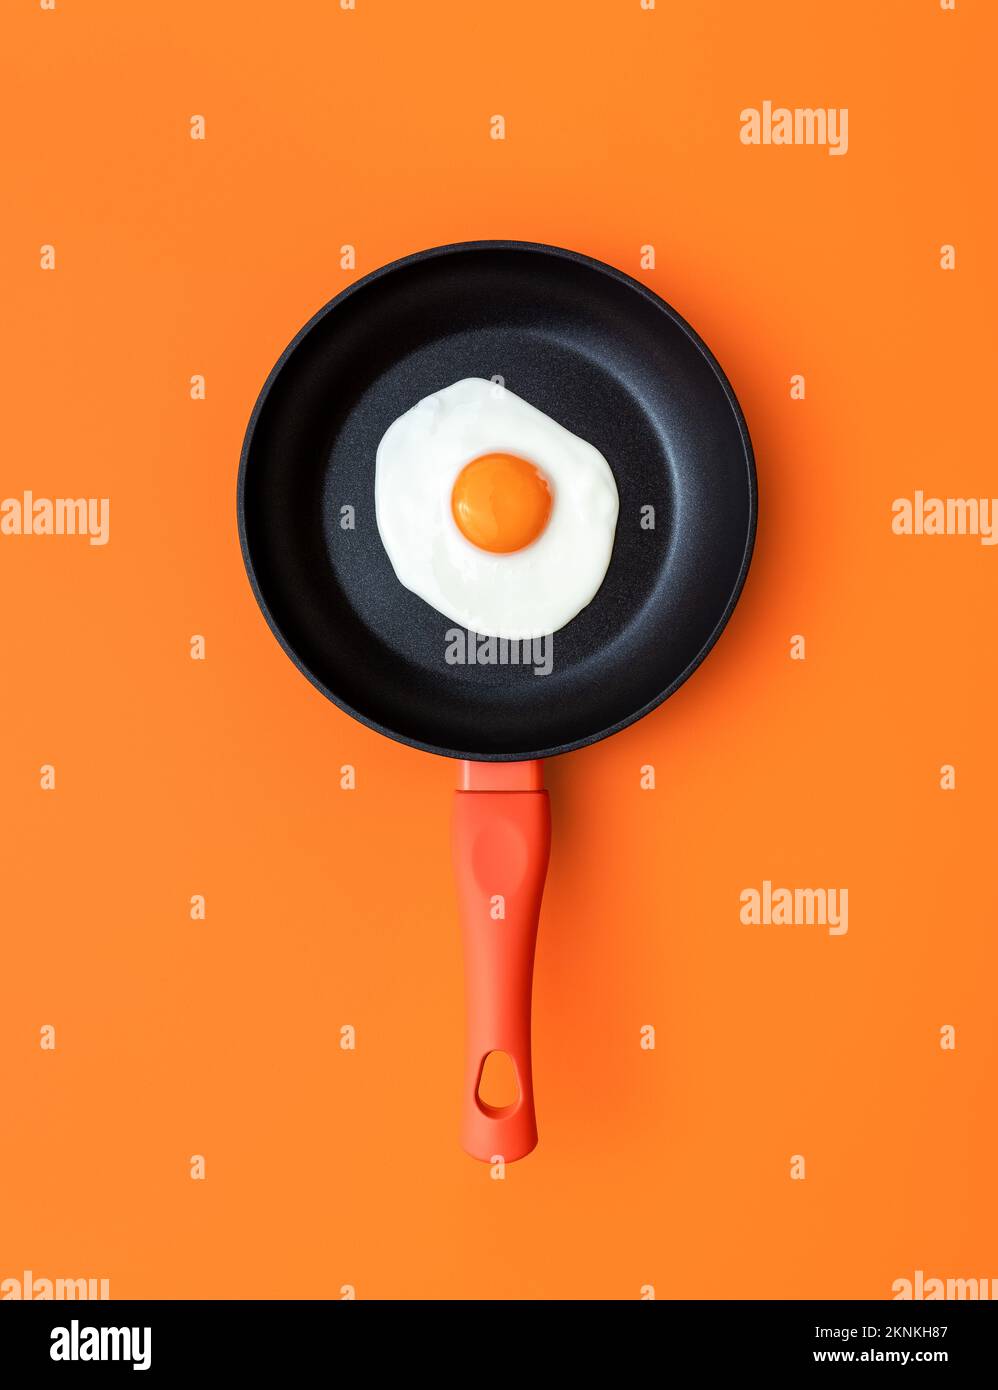 Above view with a sunny side up egg in an iron cast pan on a orange colored table. Cooking pan with a single fried egg on a colorful background. Stock Photo